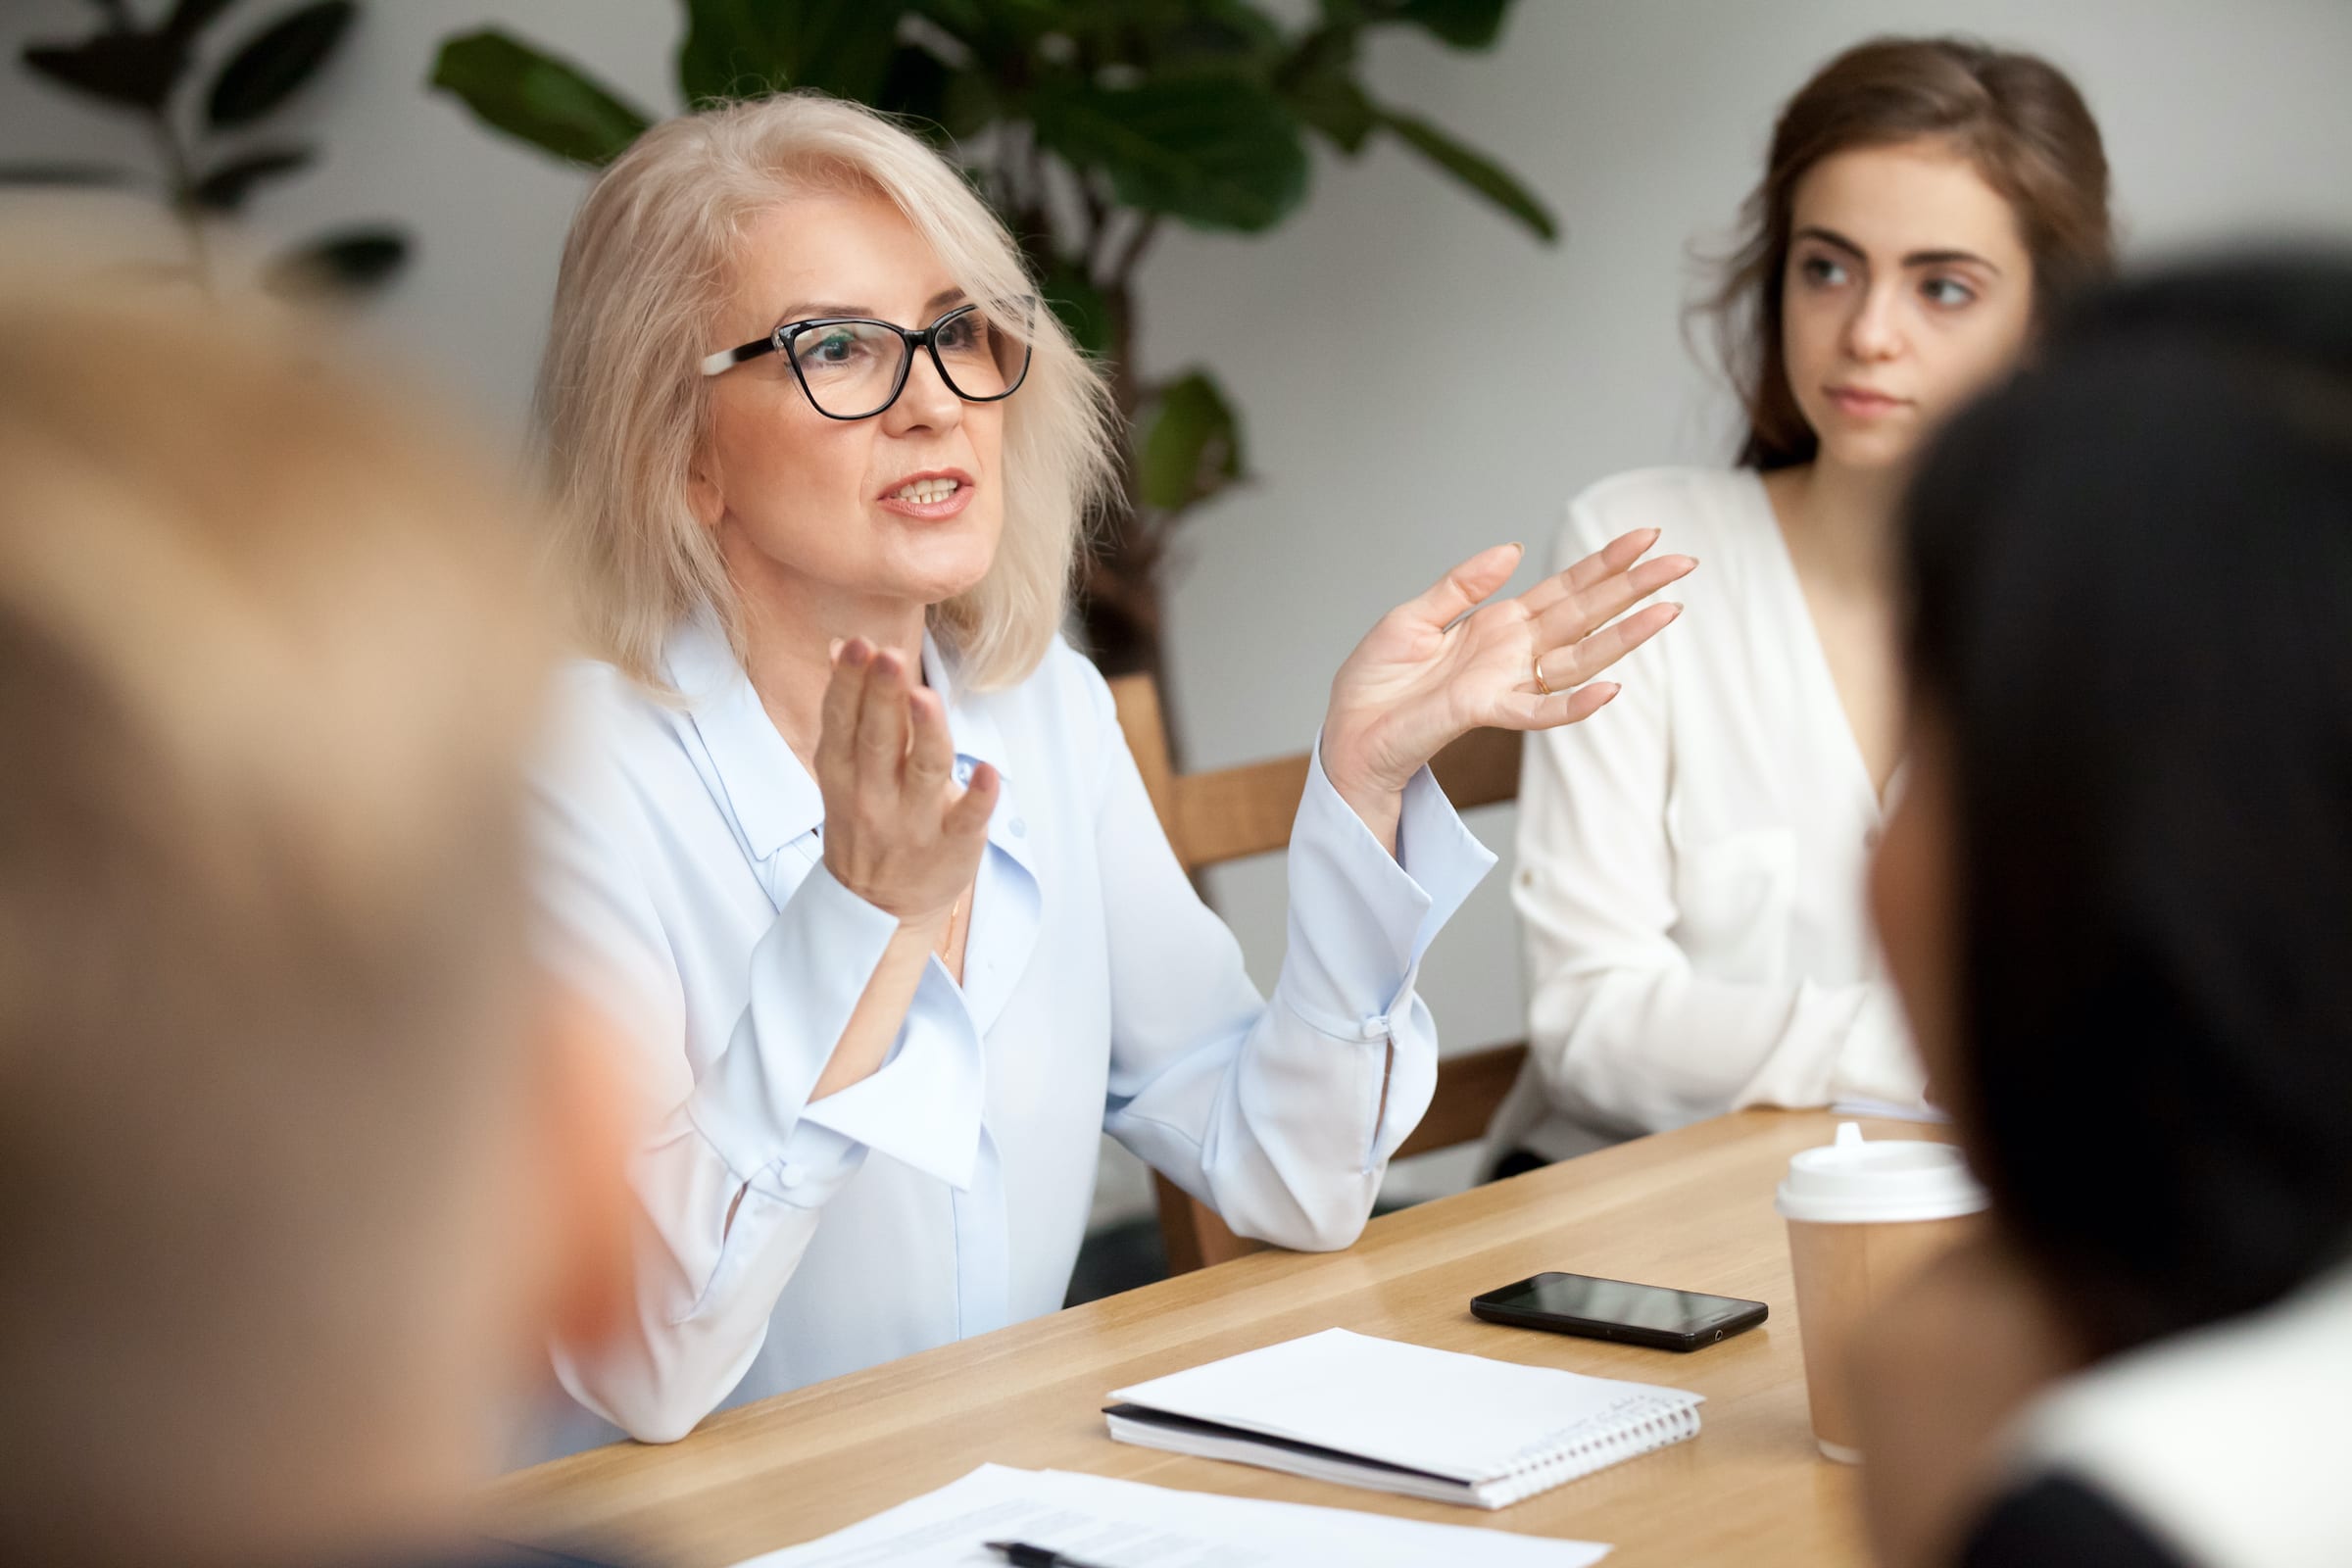 Woman leading a meeting at a conference table